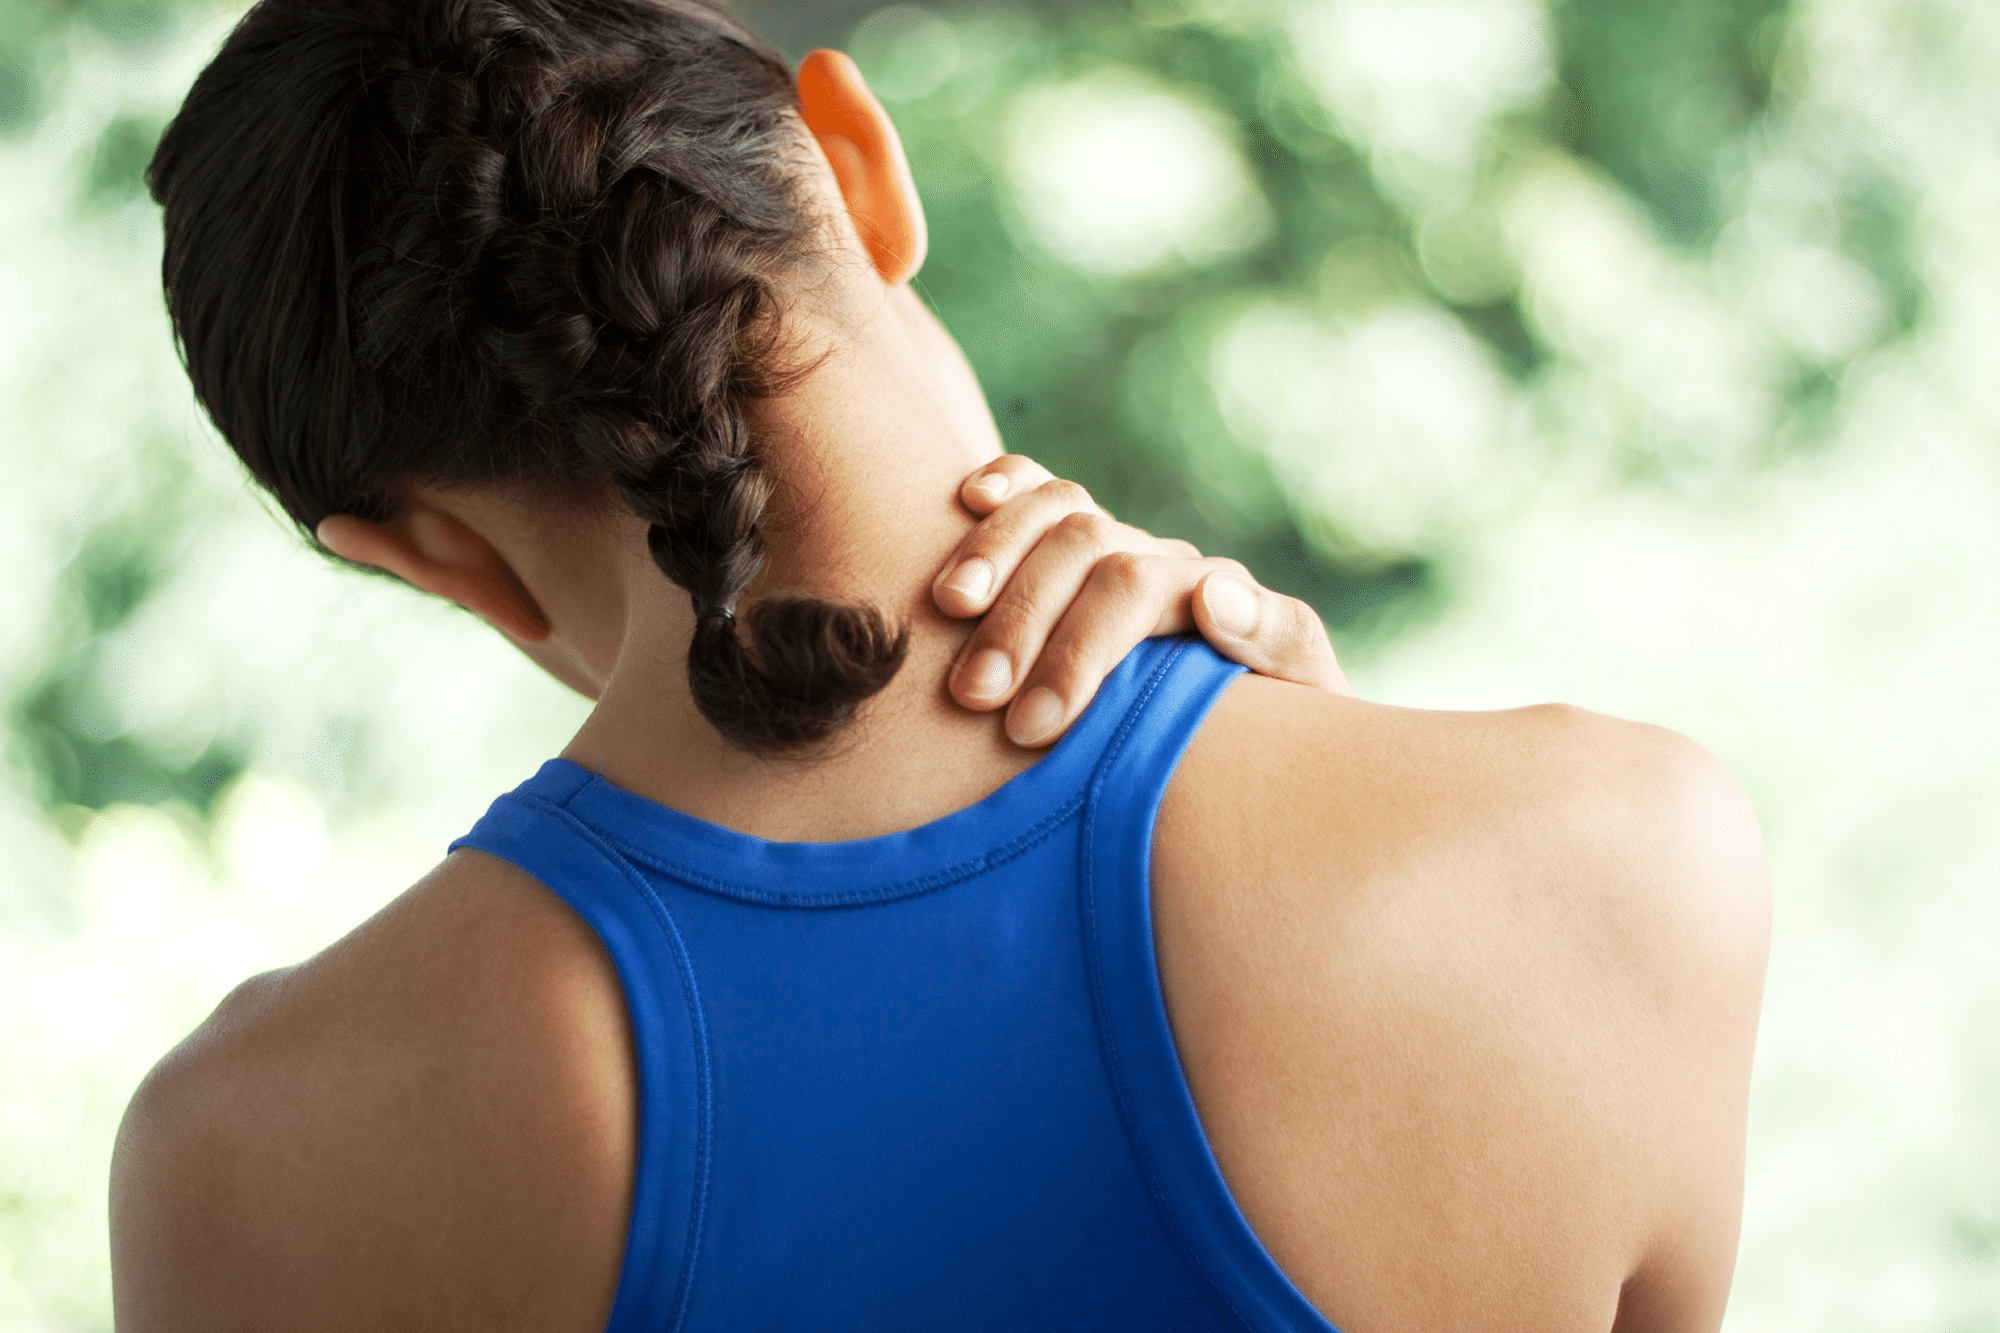 What is spondylosis and how we can fight this condition?